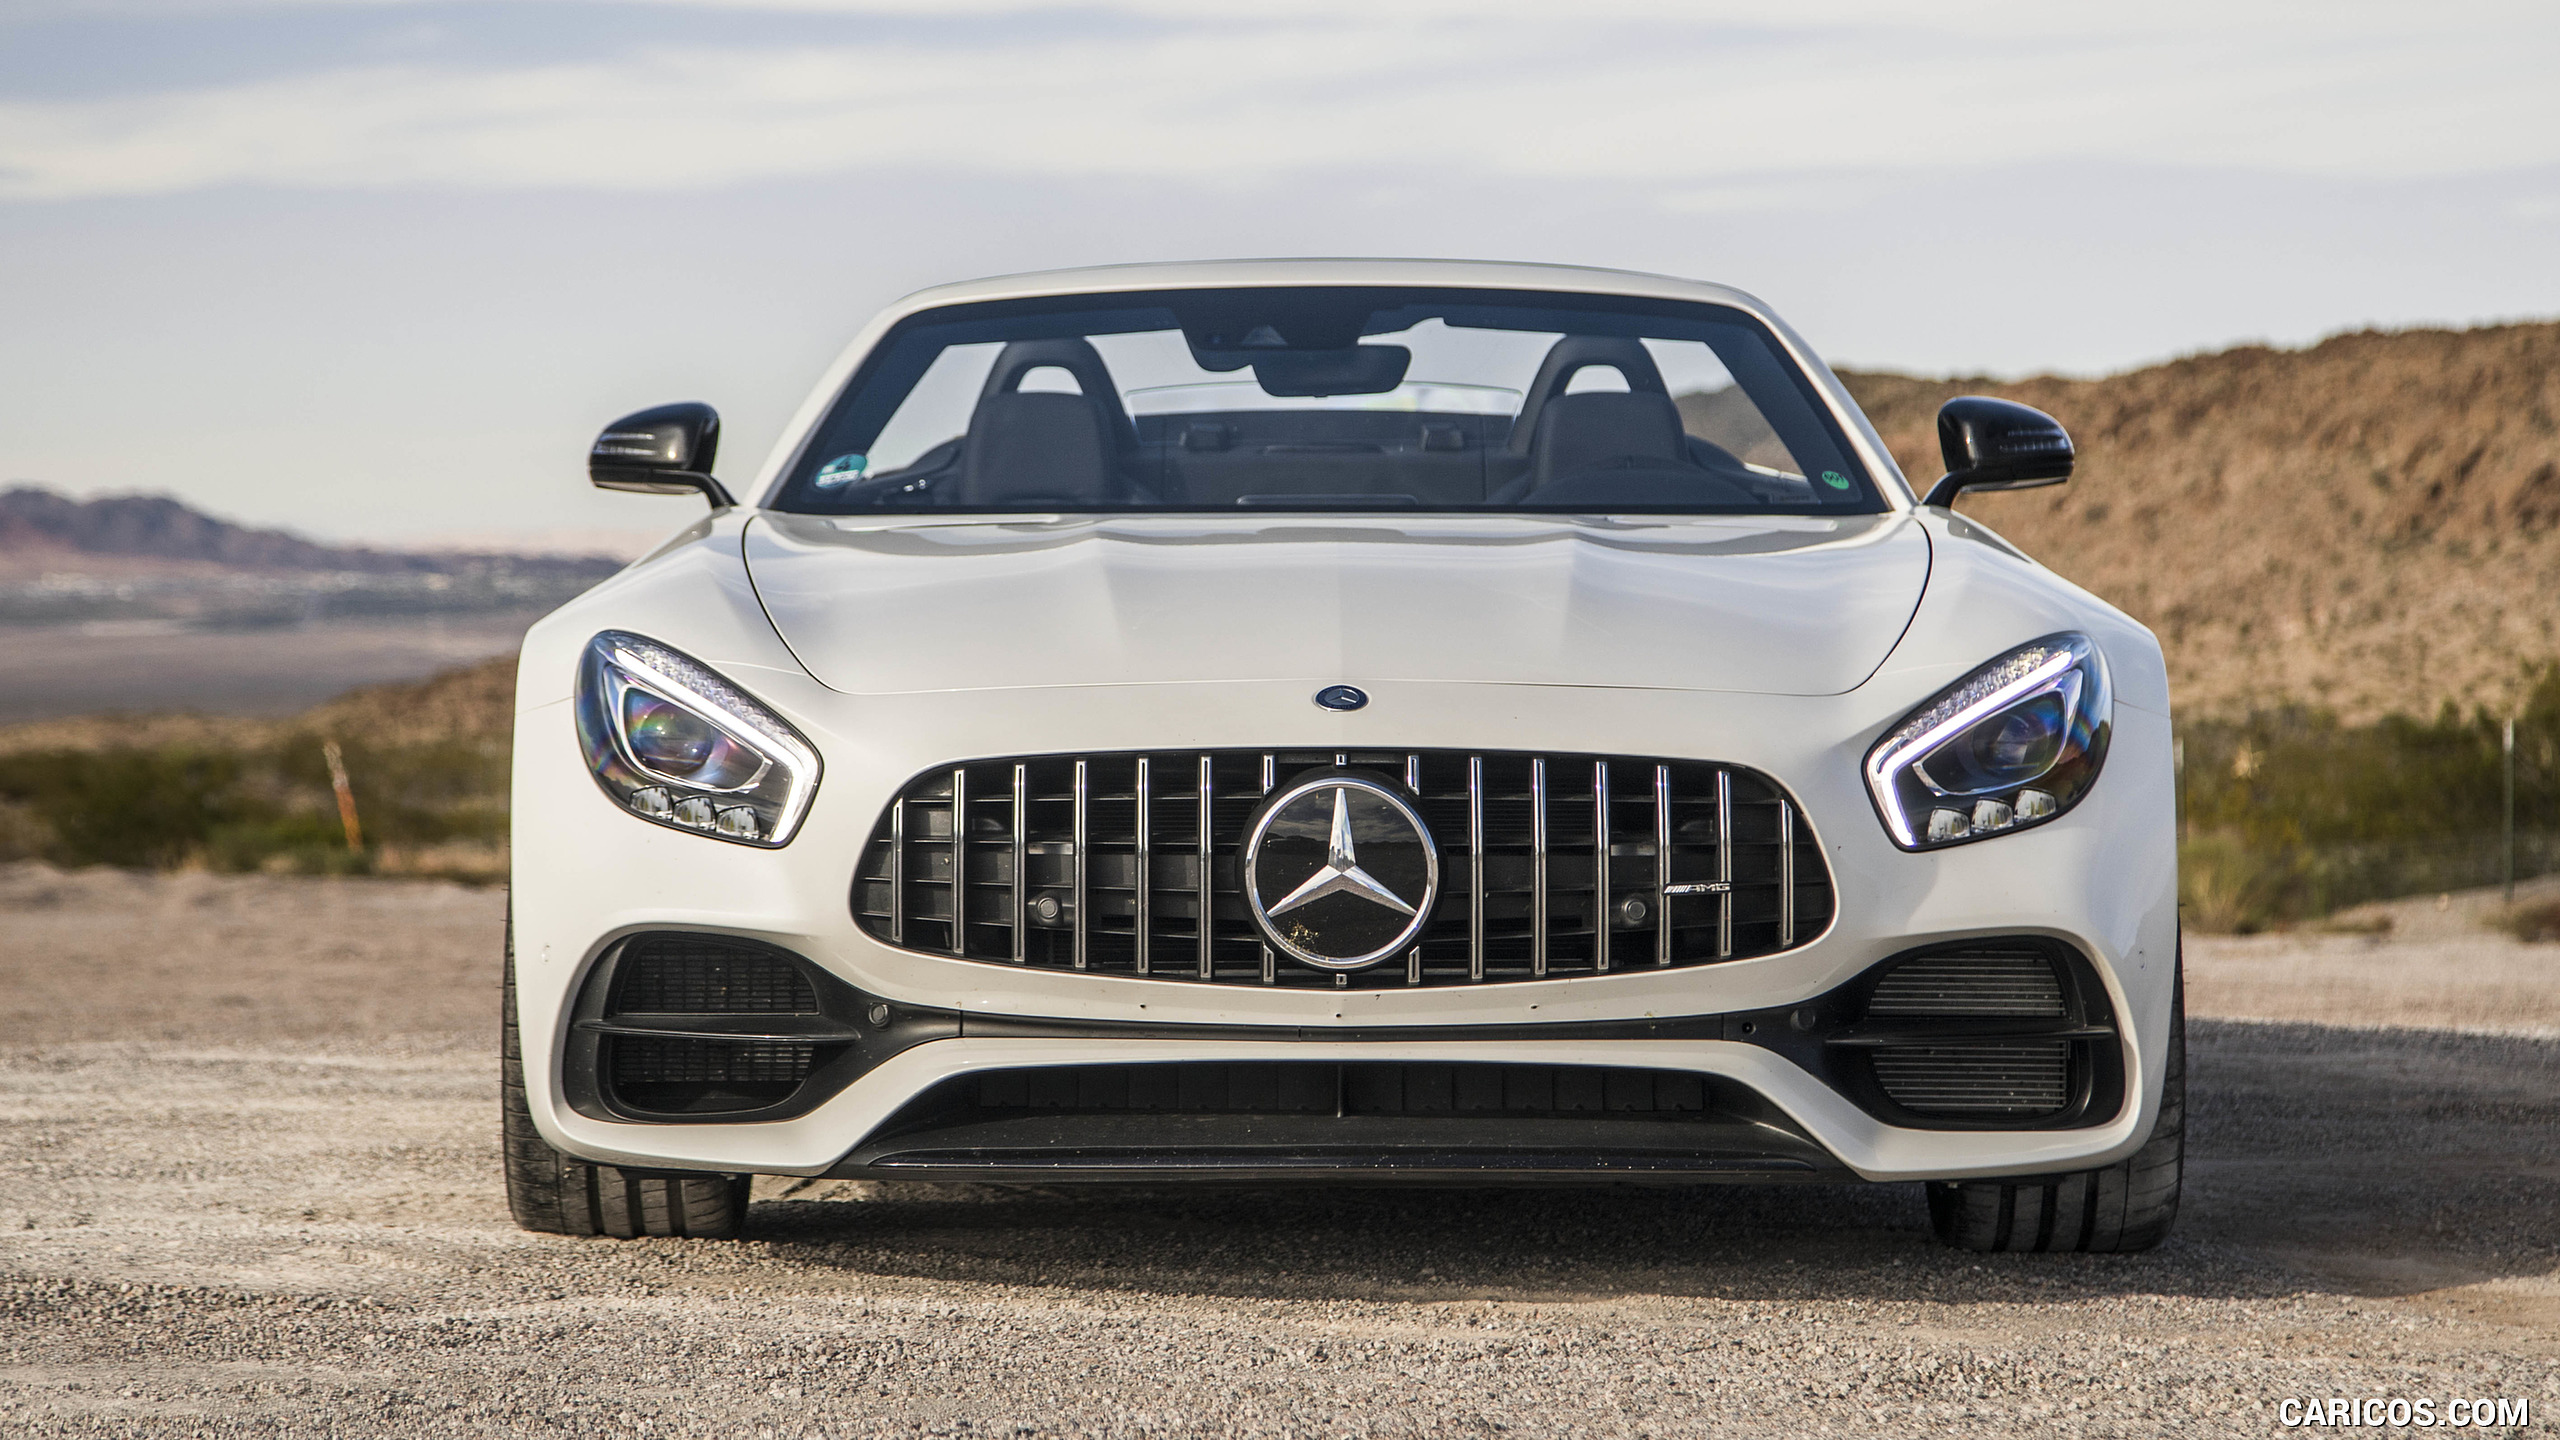 2018 Mercedes-AMG GT Roadster - Front, #97 of 350